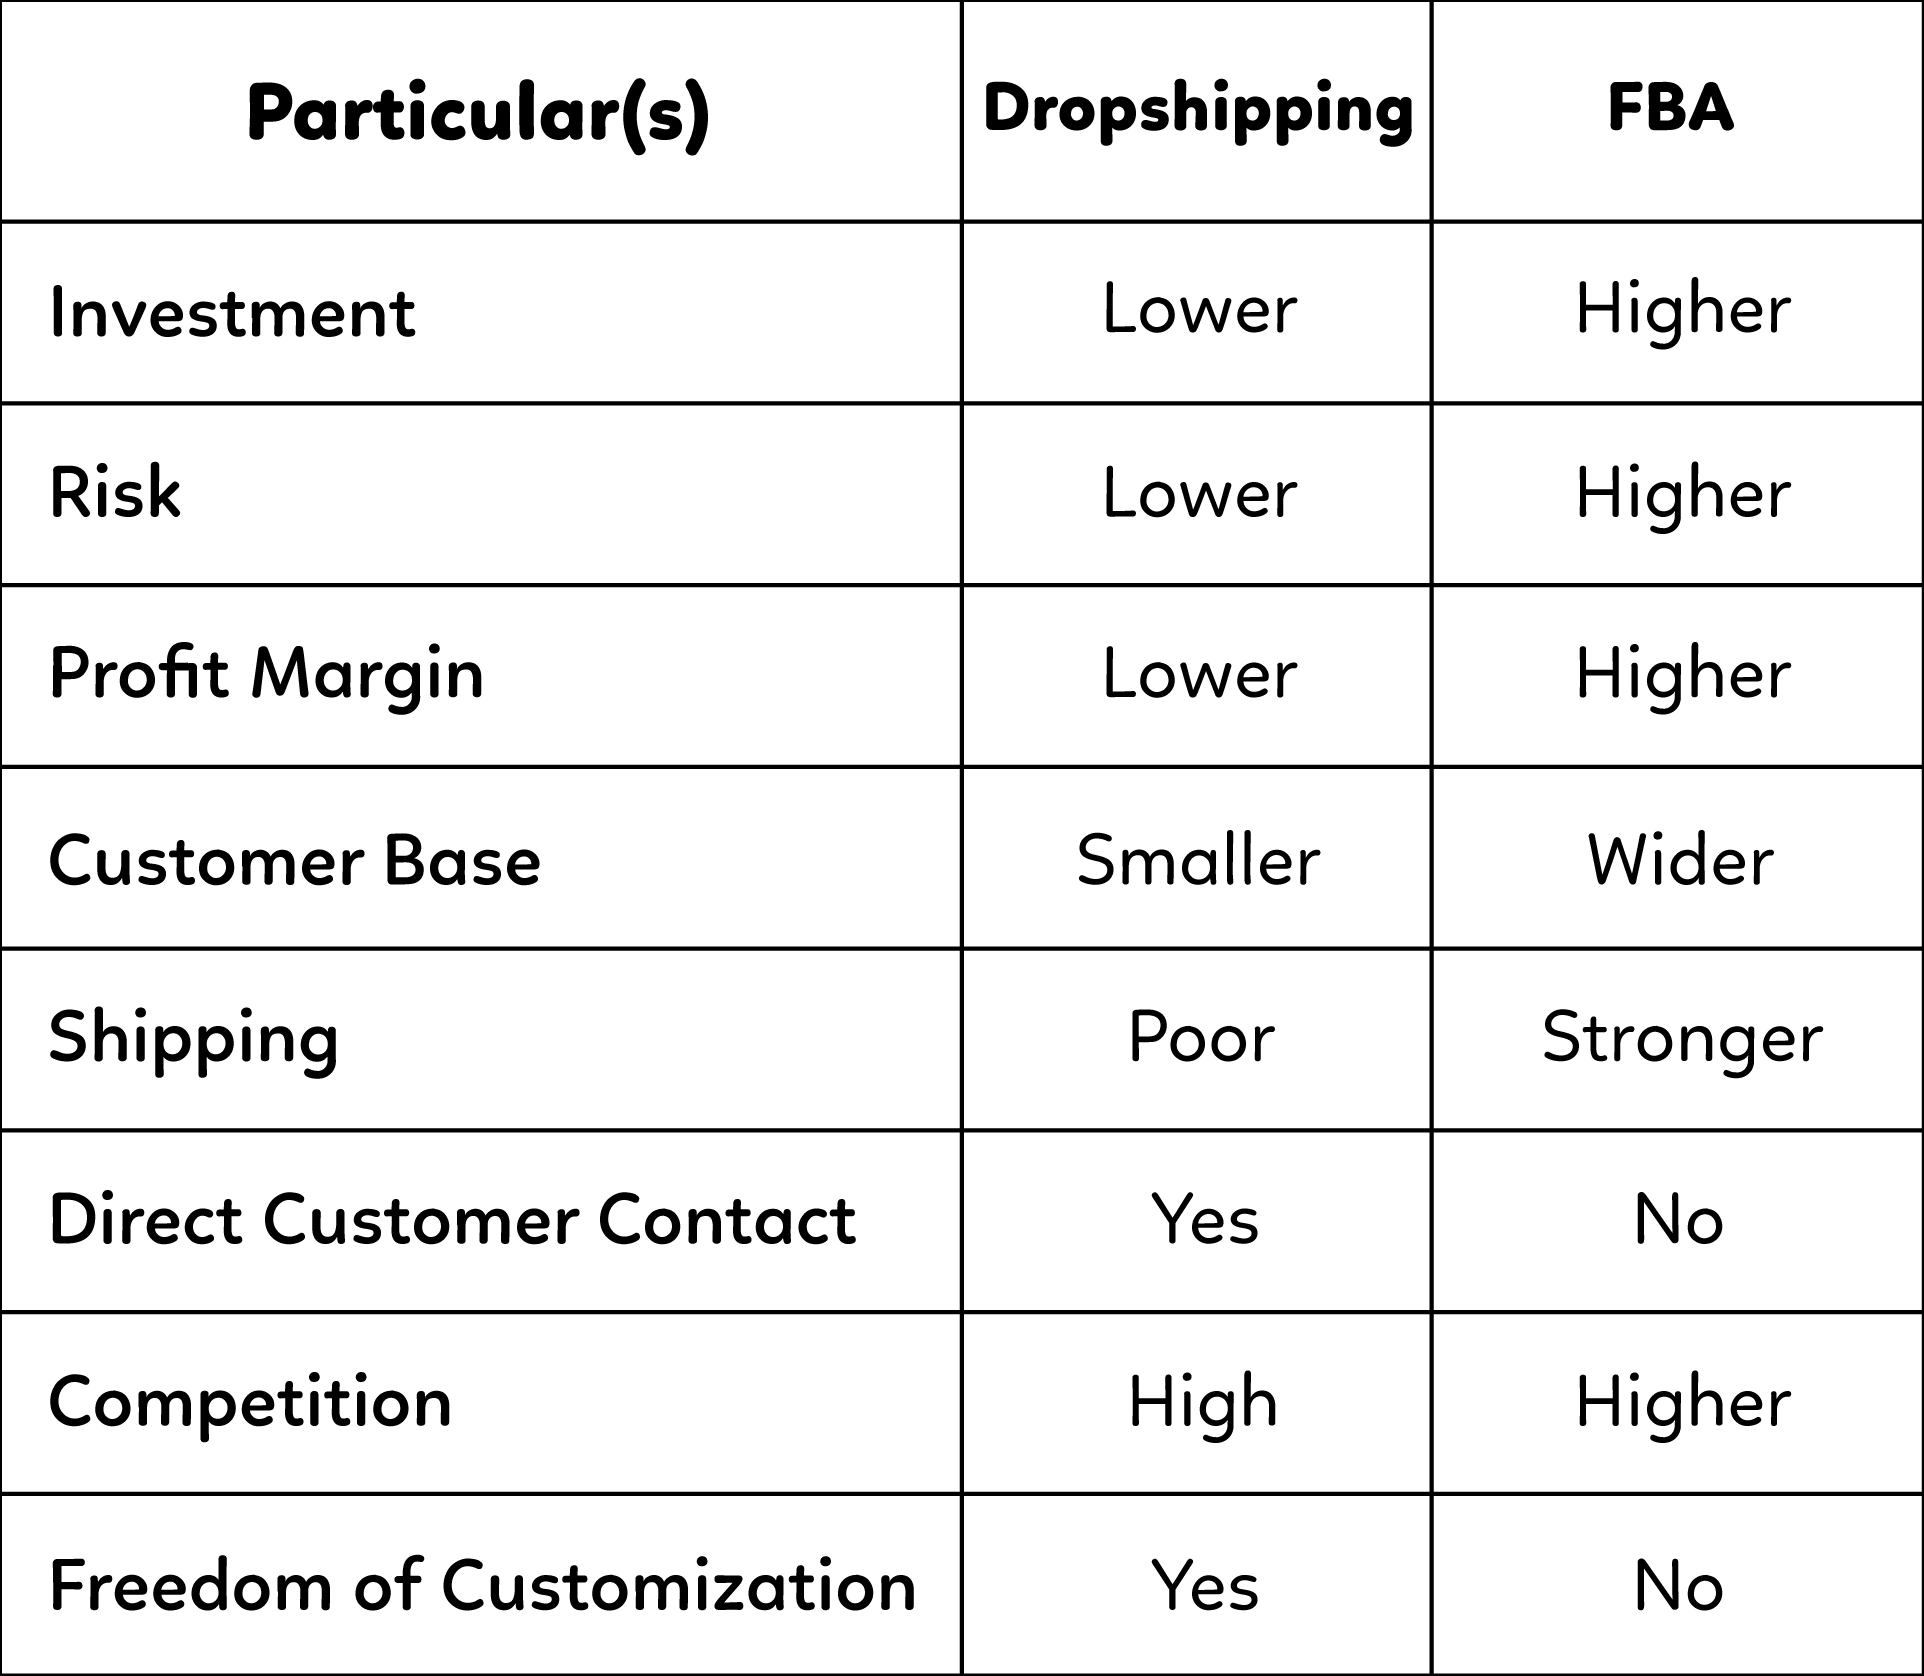 Dropshipping vs FBA 2019 - Which One is Better Starting Out? 2